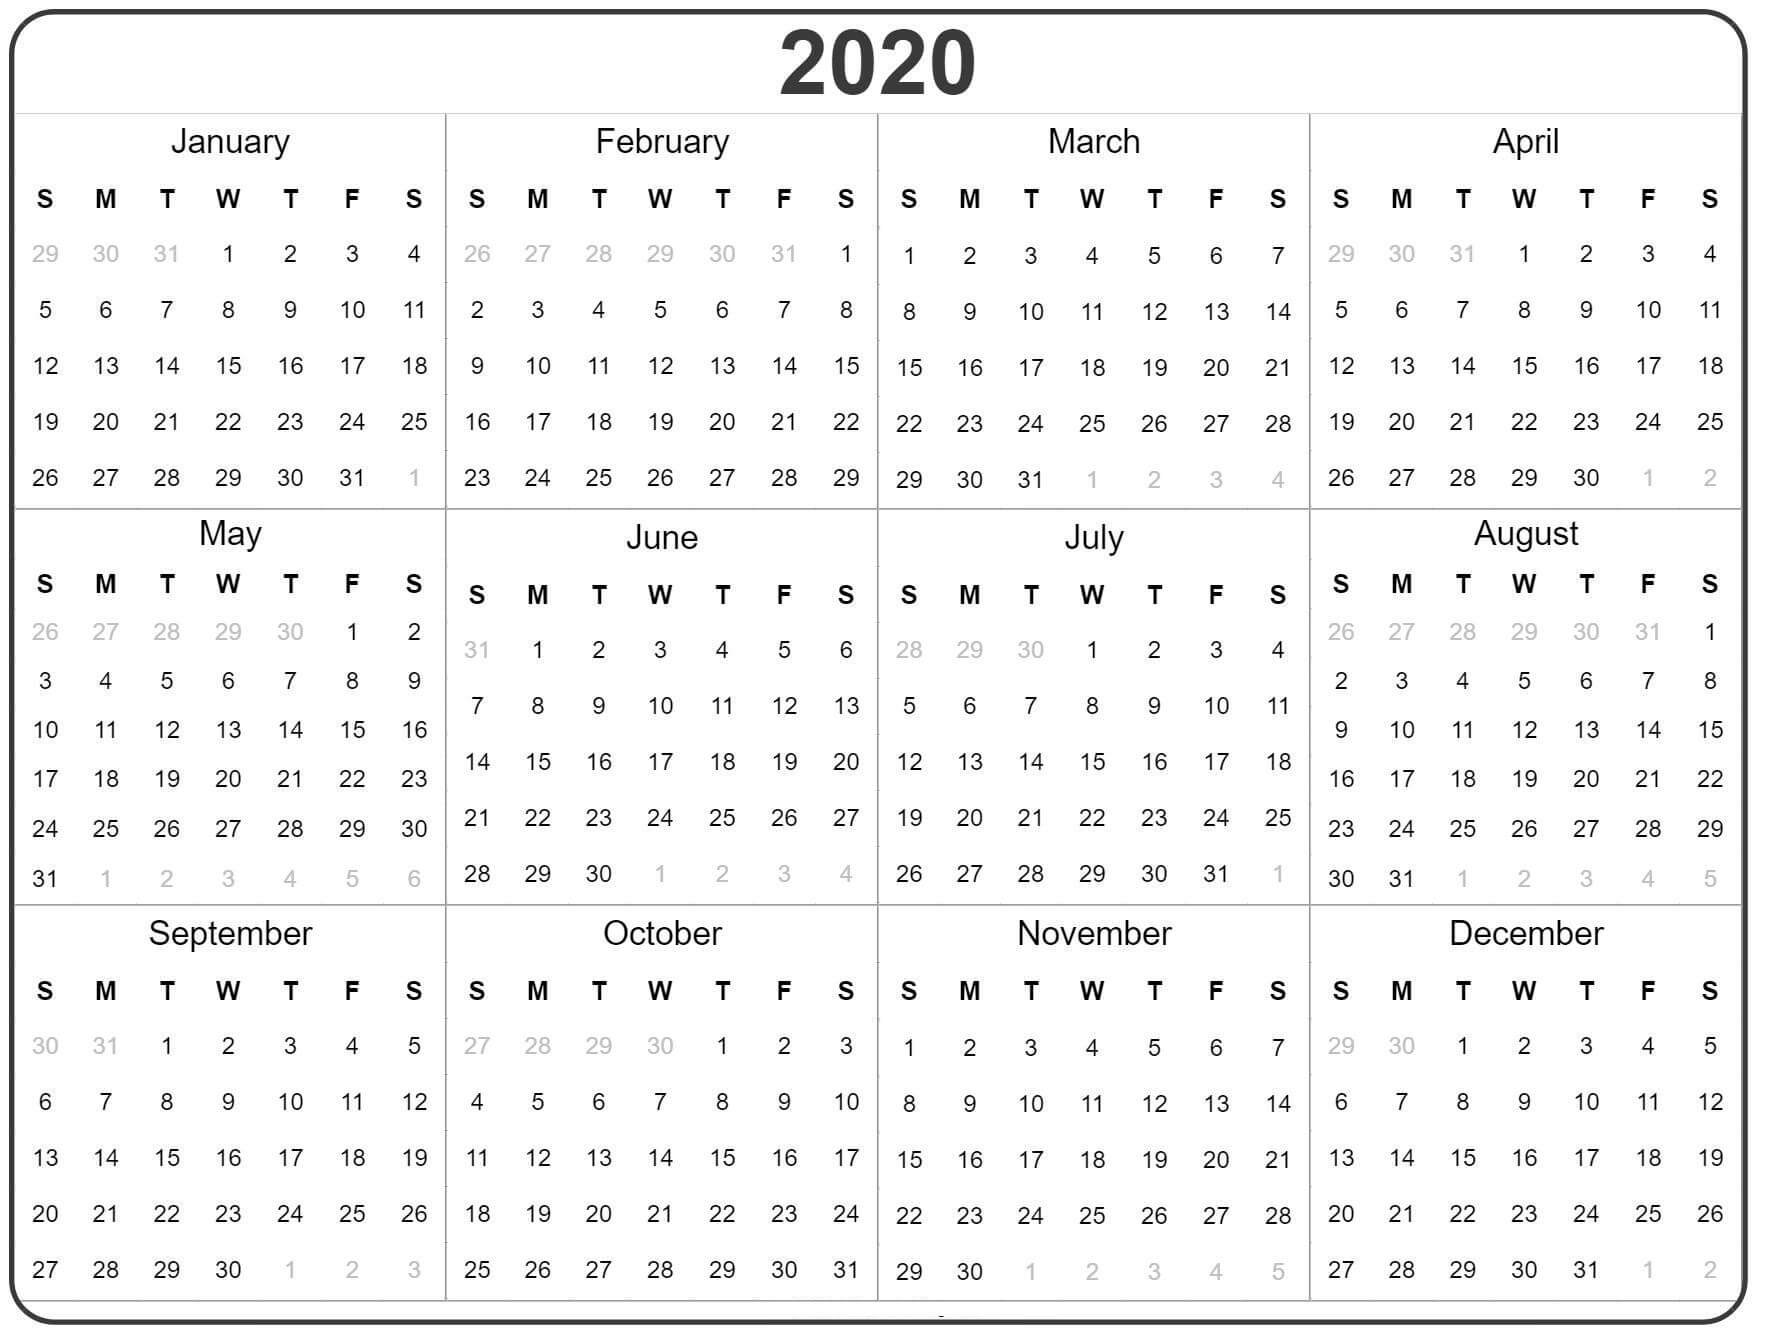 Free Yearly Calendar 2020 With Notes - 2019 Calendars For with regard to A Year At A Glance 2020